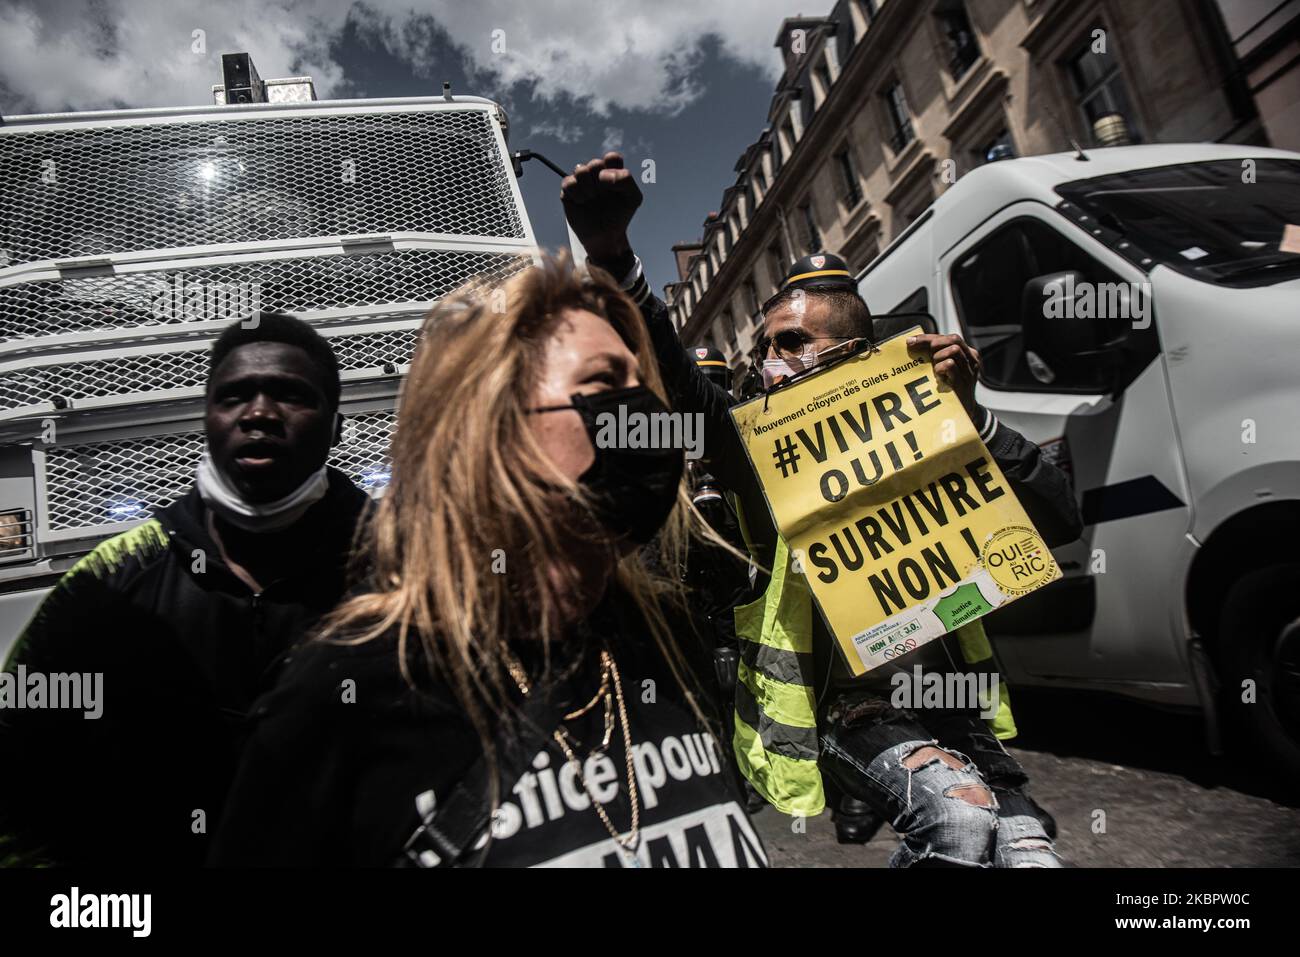 Protesters gather in front of the US Embassy in place de la Concorde, Paris, France, on June 6, 2020 to demonstrate against the murder of Adama Traore, George Floyd and victims of police racism and violence. (Photo by George Nickels/NurPhoto) Stock Photo